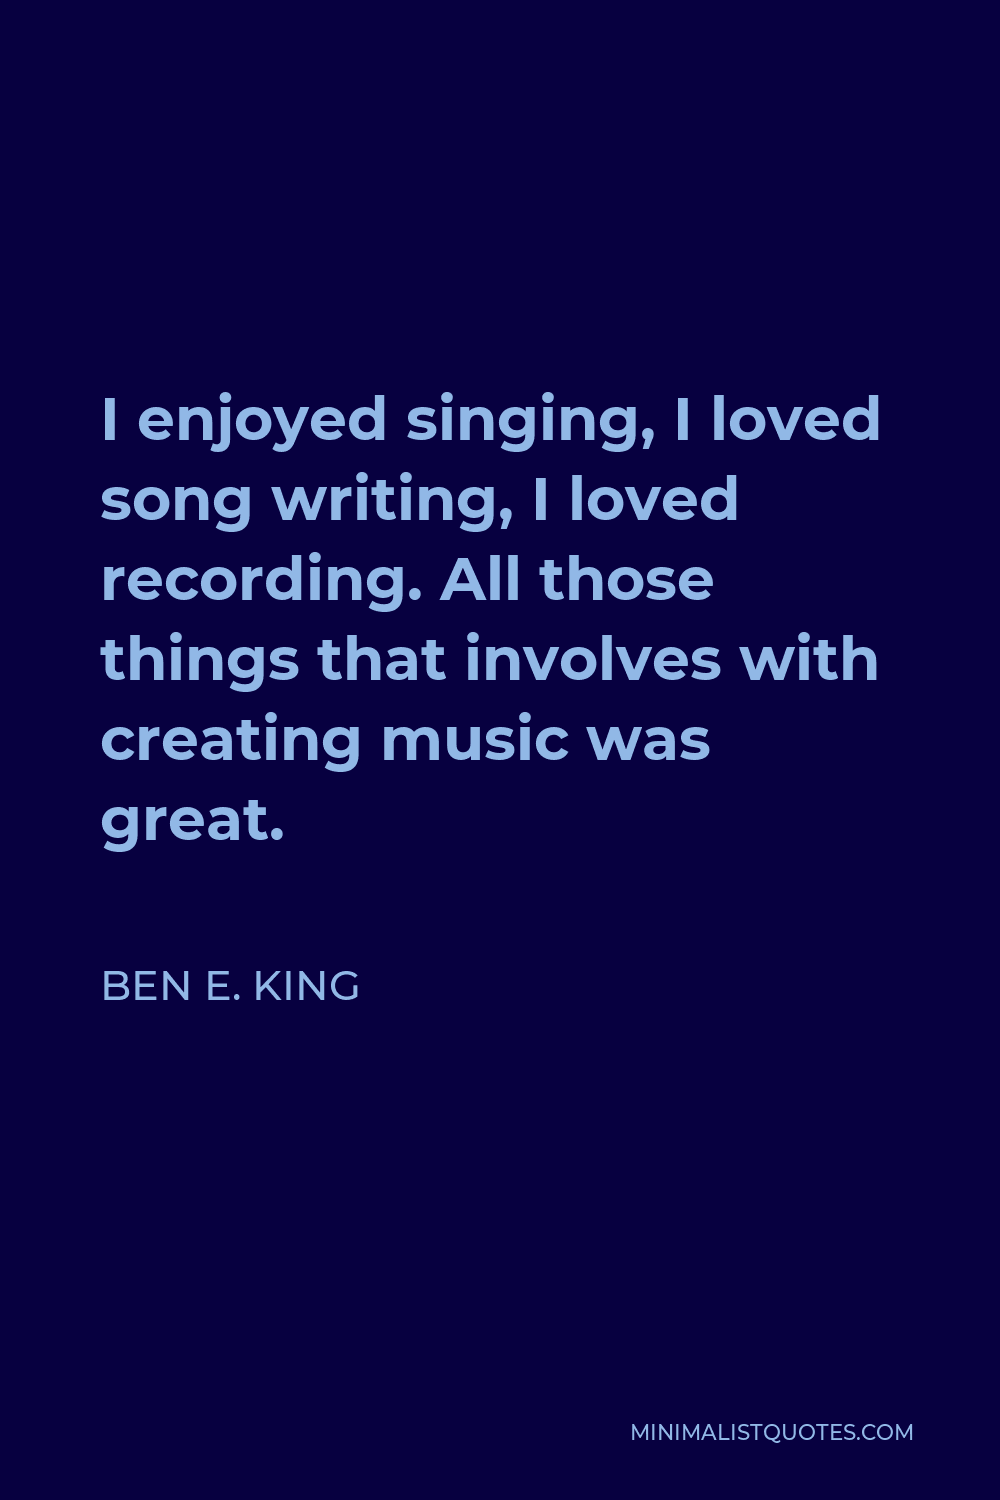 Ben E. King Quote - I enjoyed singing, I loved song writing, I loved recording. All those things that involves with creating music was great.